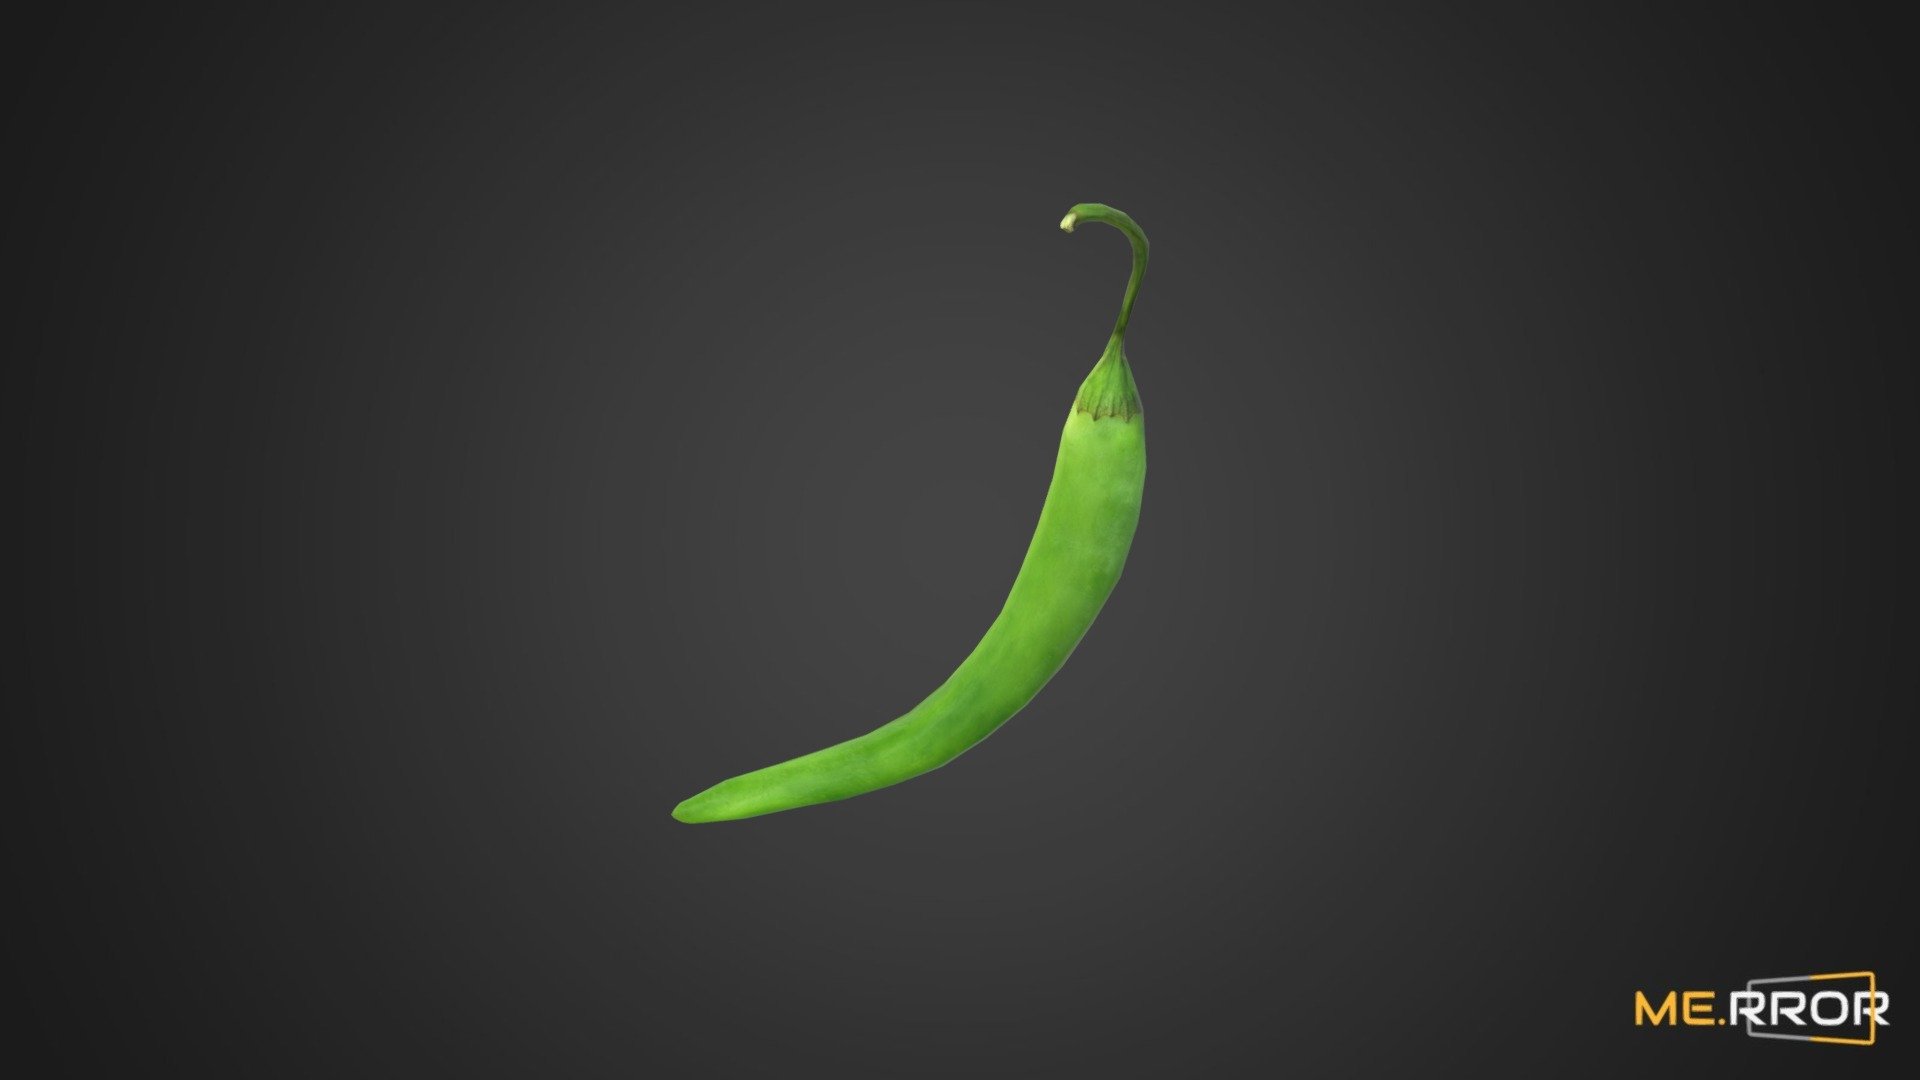 MERROR is a 3D Content PLATFORM which introduces various Asian assets to the 3D world


3DScanning #Photogrametry #ME.RROR - [Game-Ready] Green Pepper - Buy Royalty Free 3D model by ME.RROR Studio (@merror) 3d model